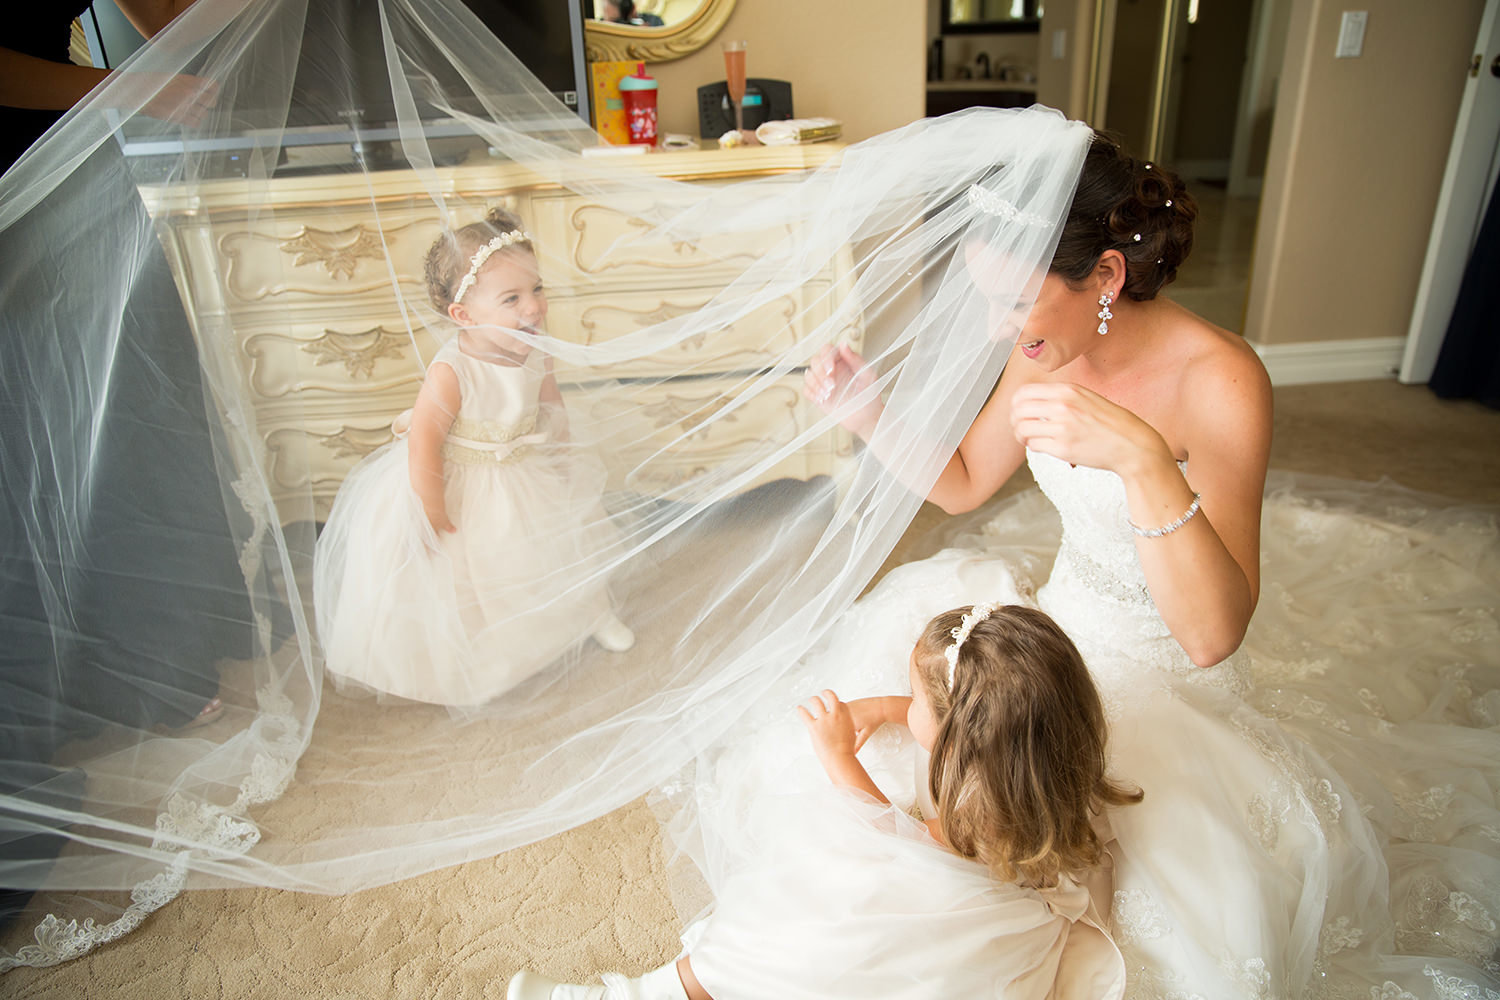 Wonderful moment between the bridesmaid and her flower-girls